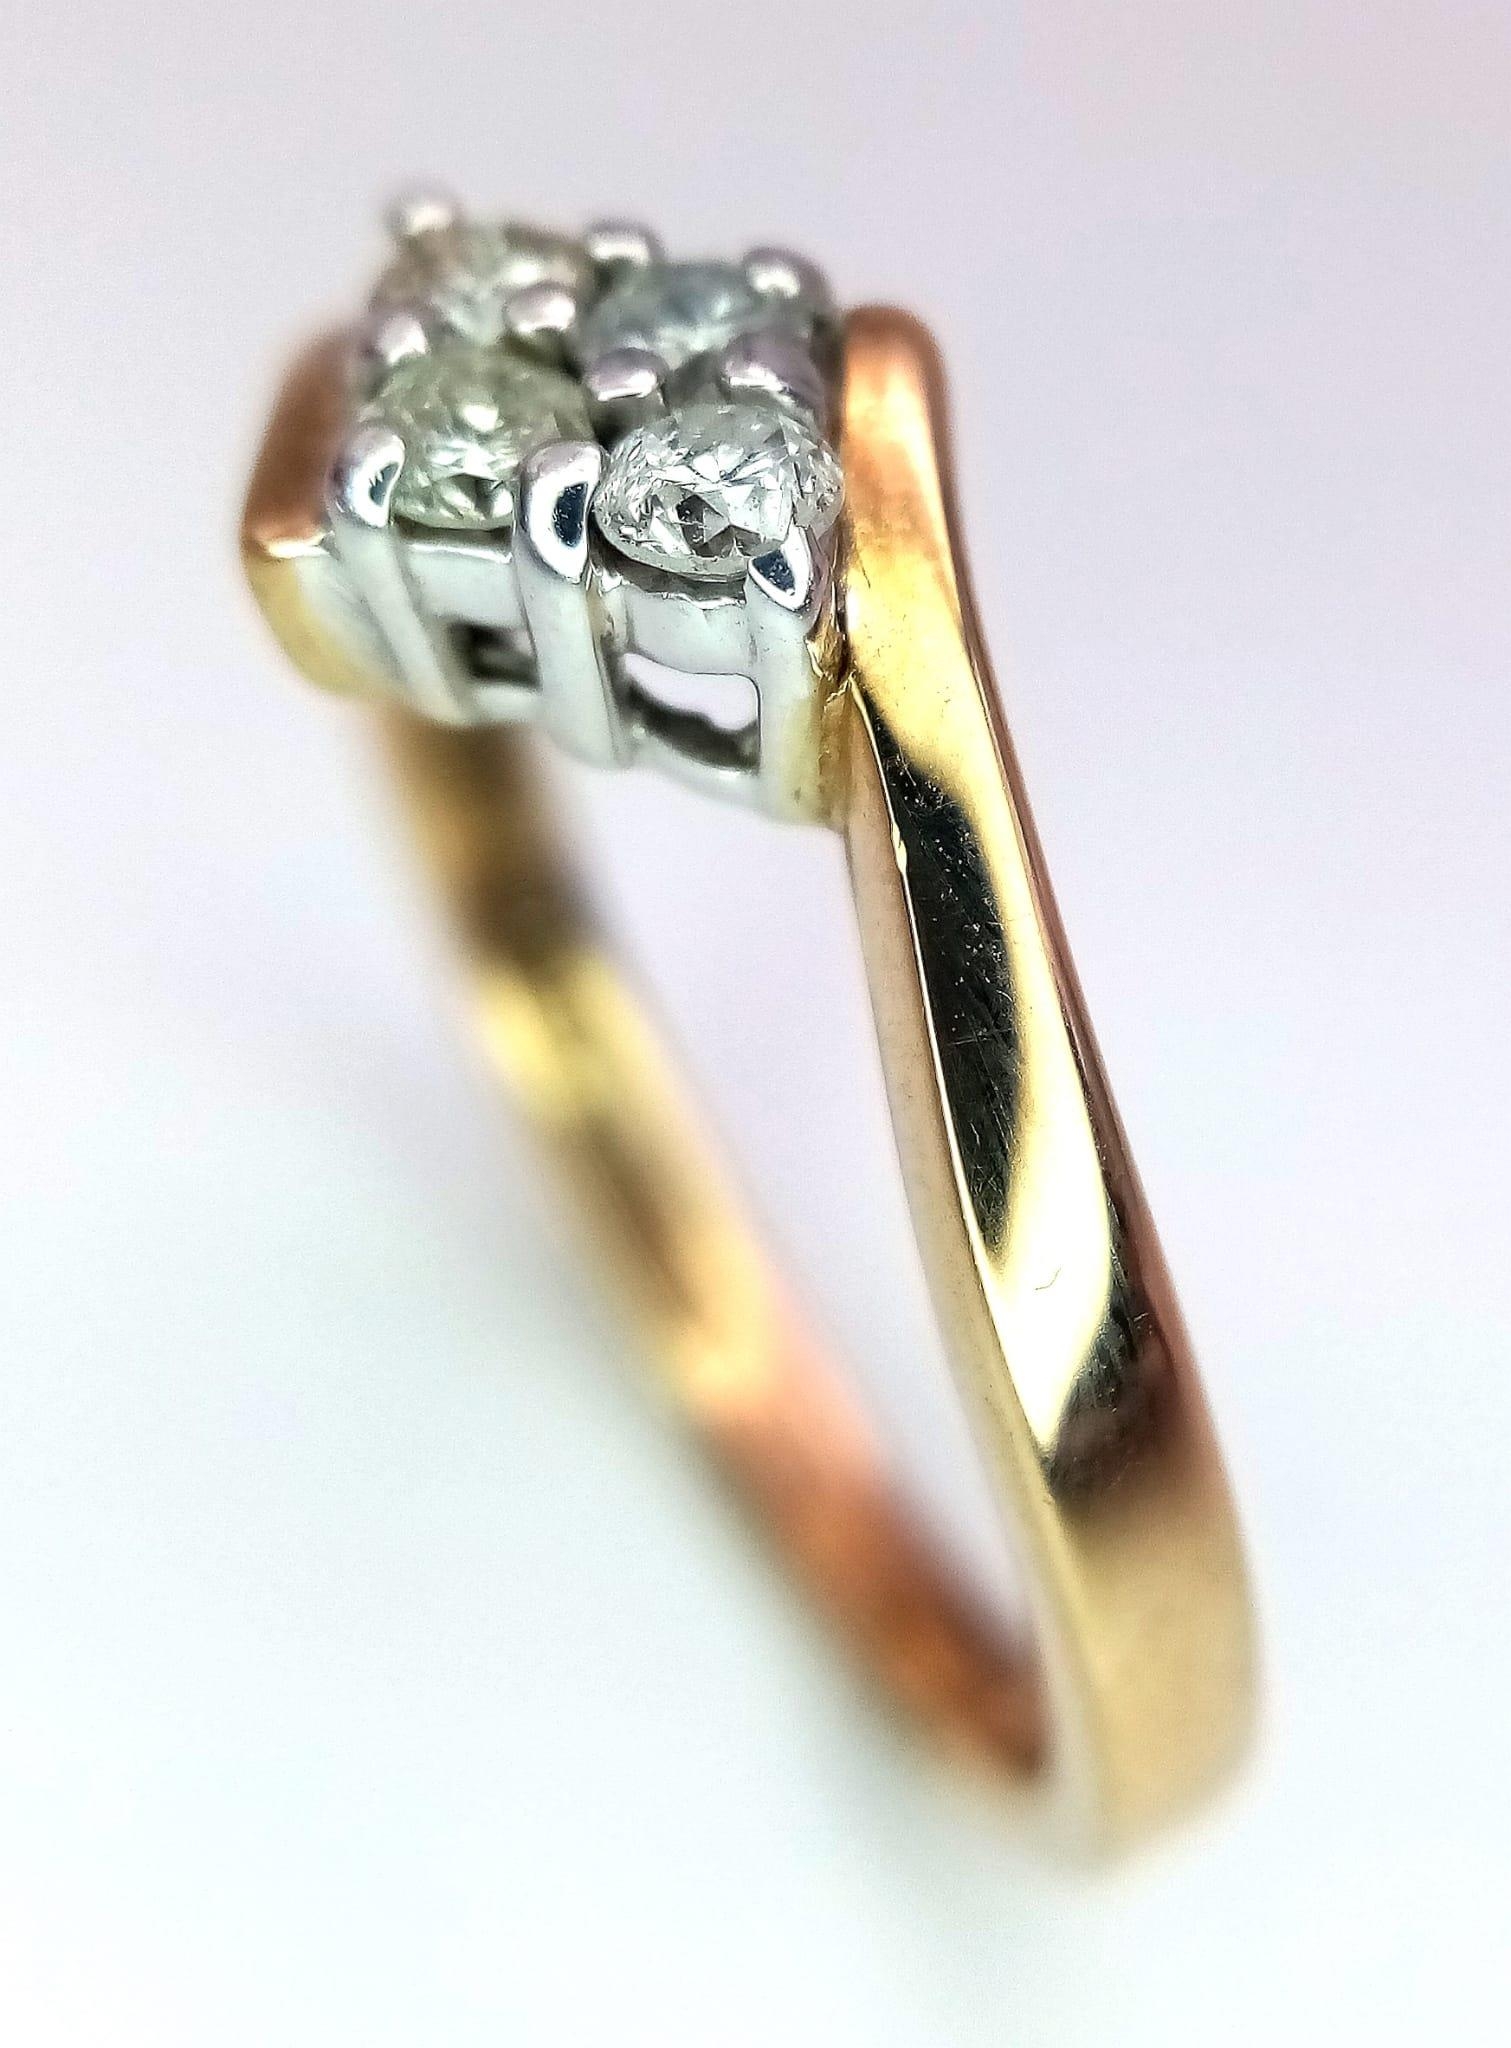 9K Yellow Gold Diamond crossover diamond Ring, 0.25ct diamond weight, 2.9g total weight, size M - Image 6 of 7